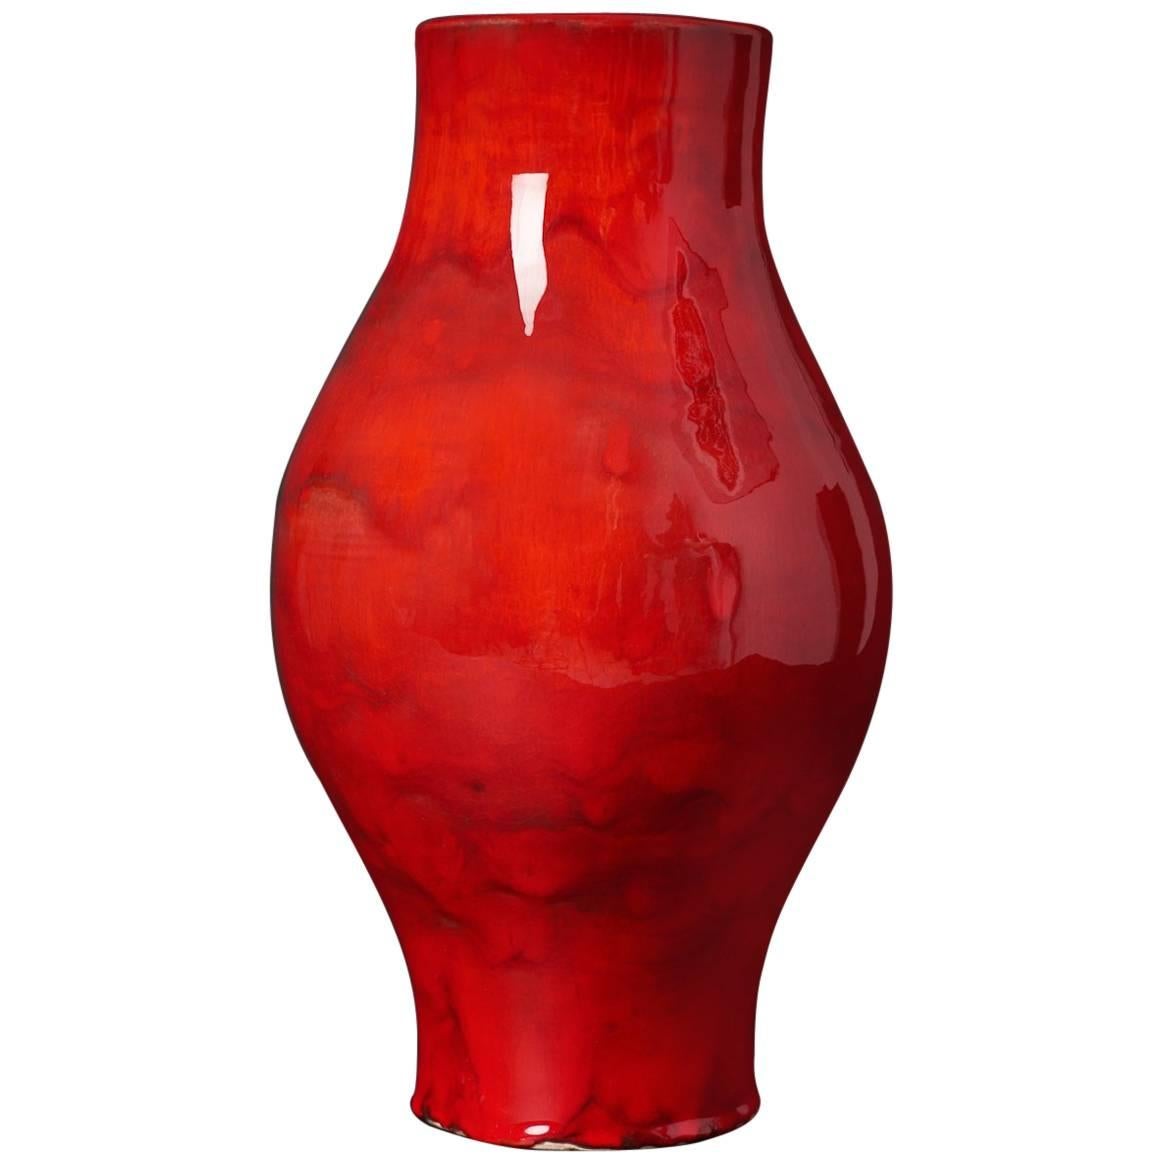 Shiny Red Enameled Vase H 40 cm  Signed by RJ Cloutier 1960's